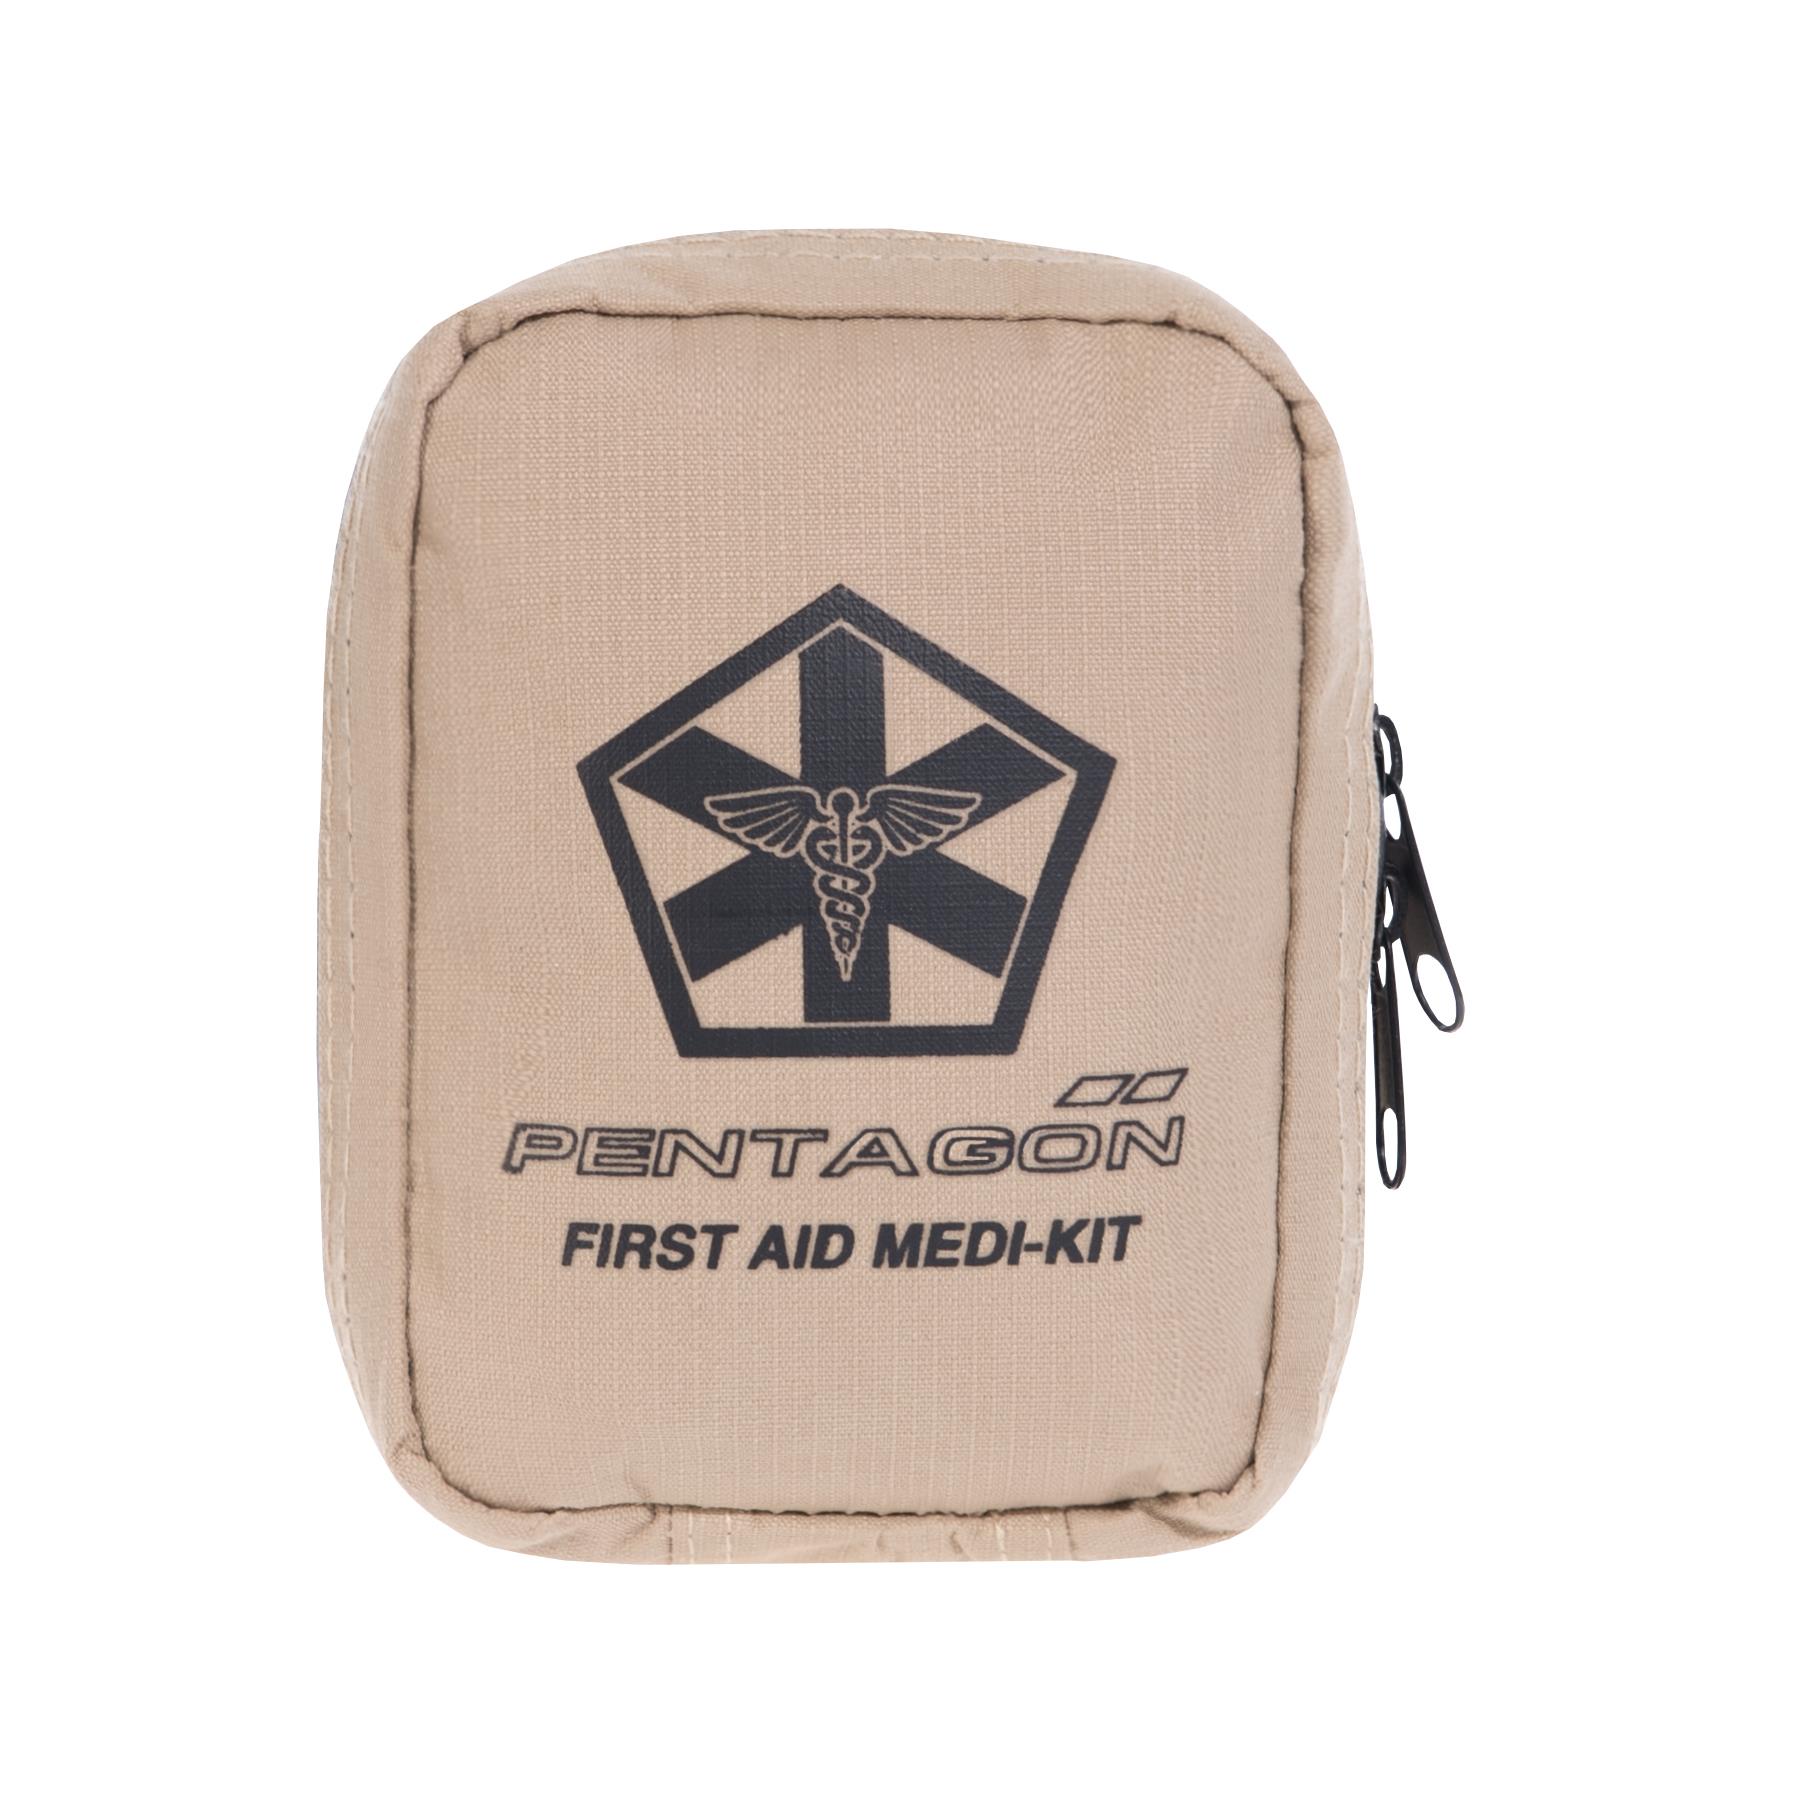 Pentagon First Aid Kit Hippokrates 